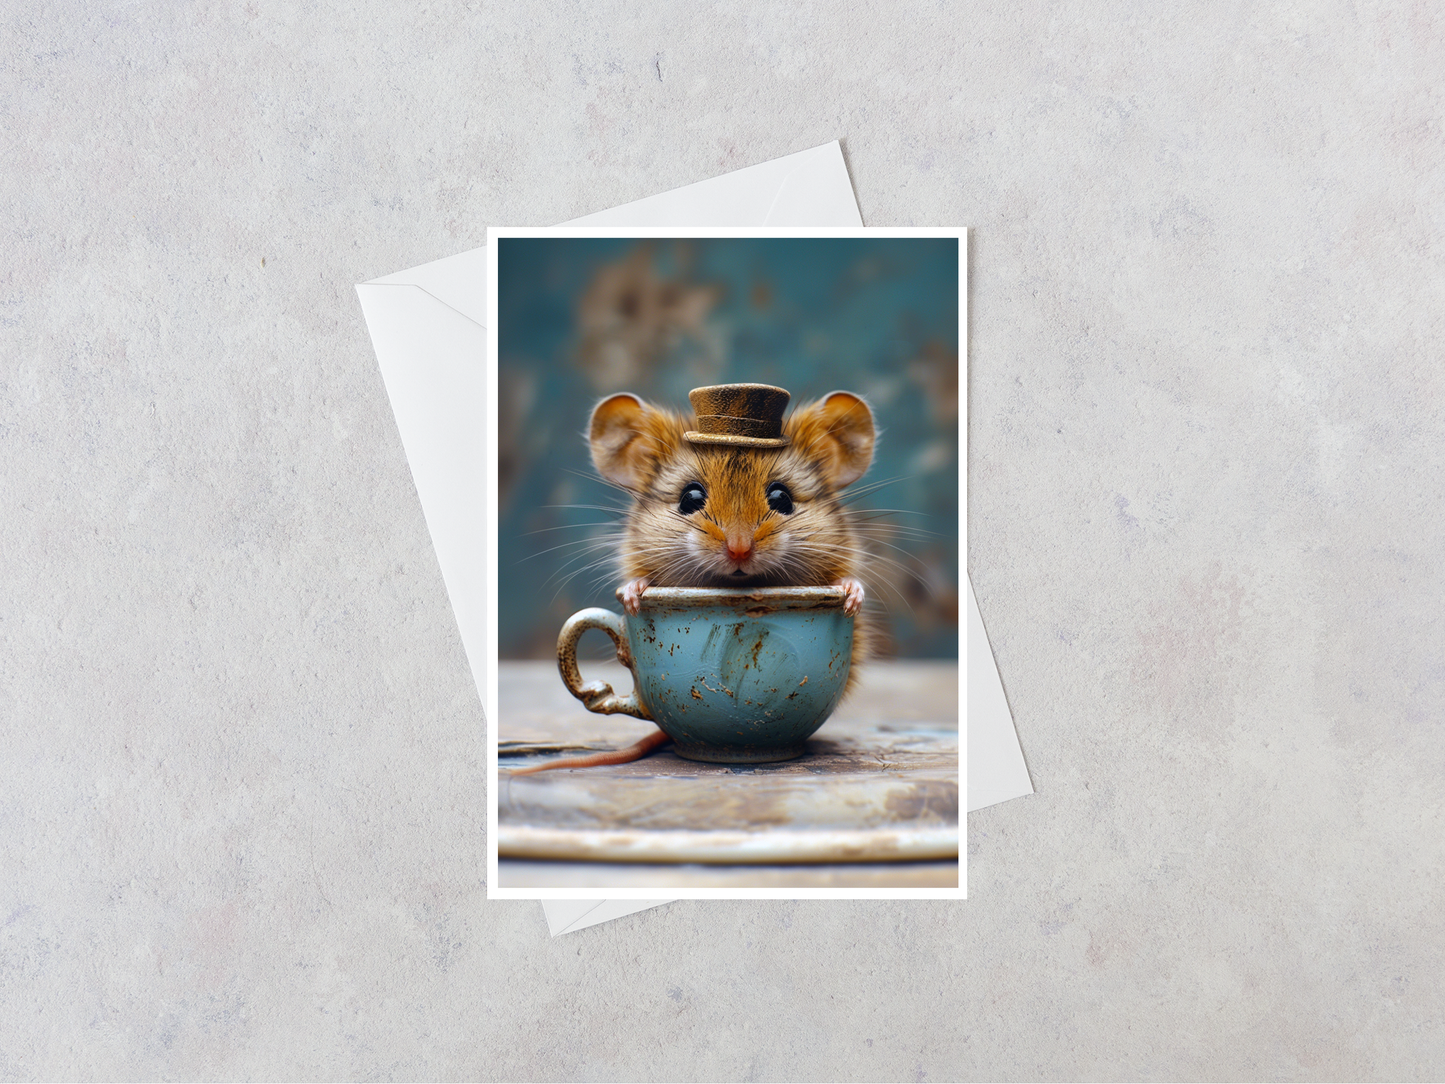 Greeting Card - Mouse in Aqua Vintage China Teacup